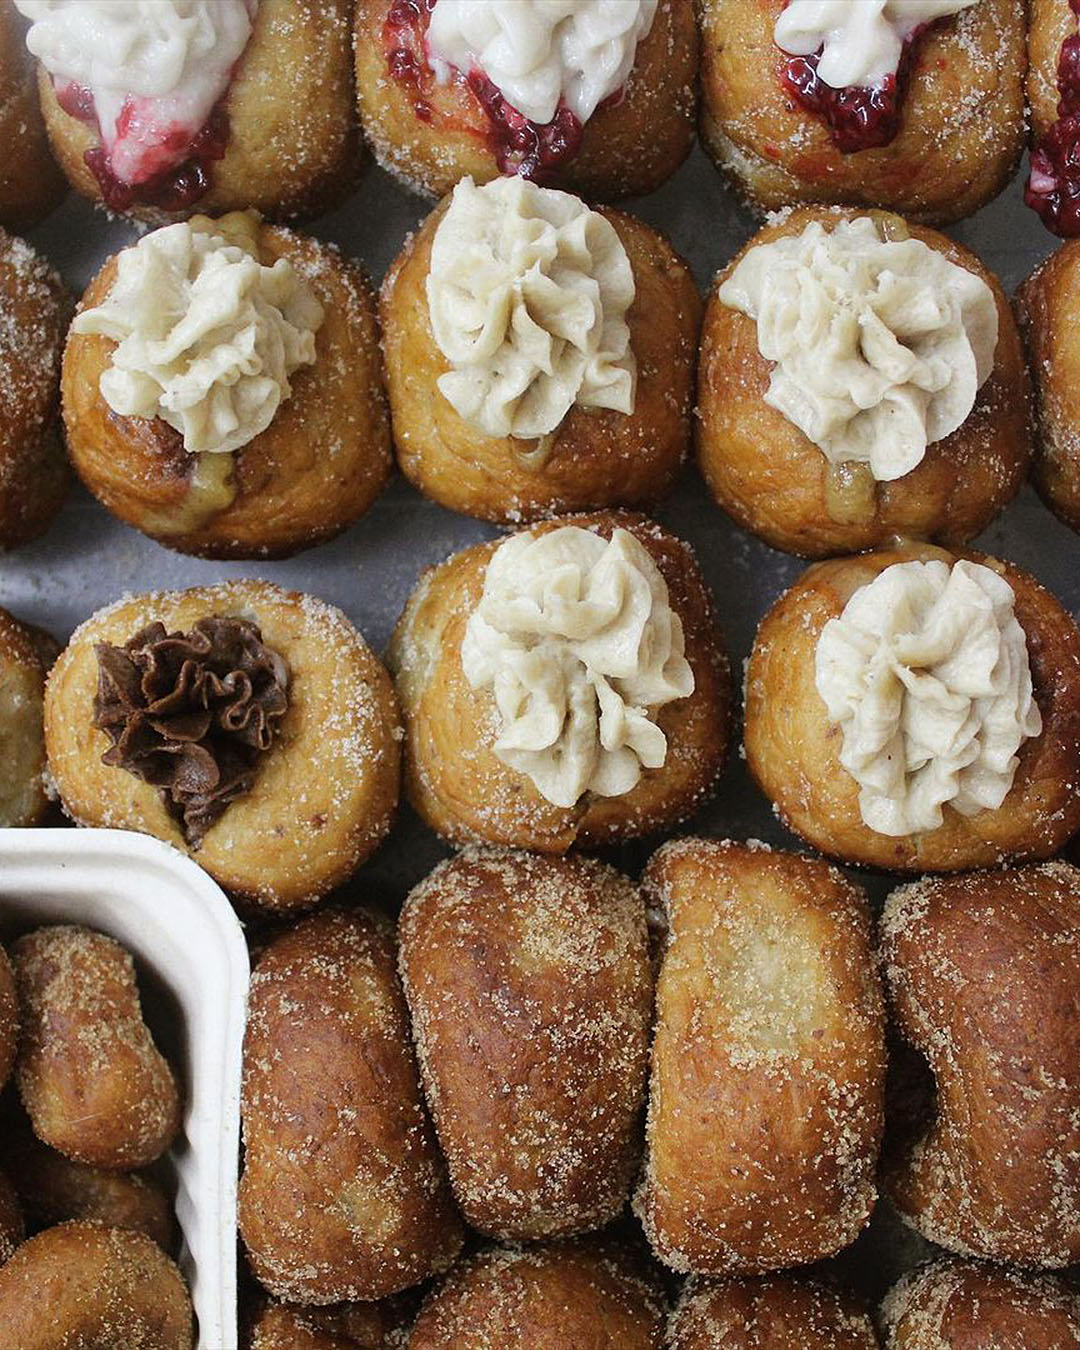 Doughnuts, doughnuts everywhere. Filled with vanilla cream and other delectable fillings. 